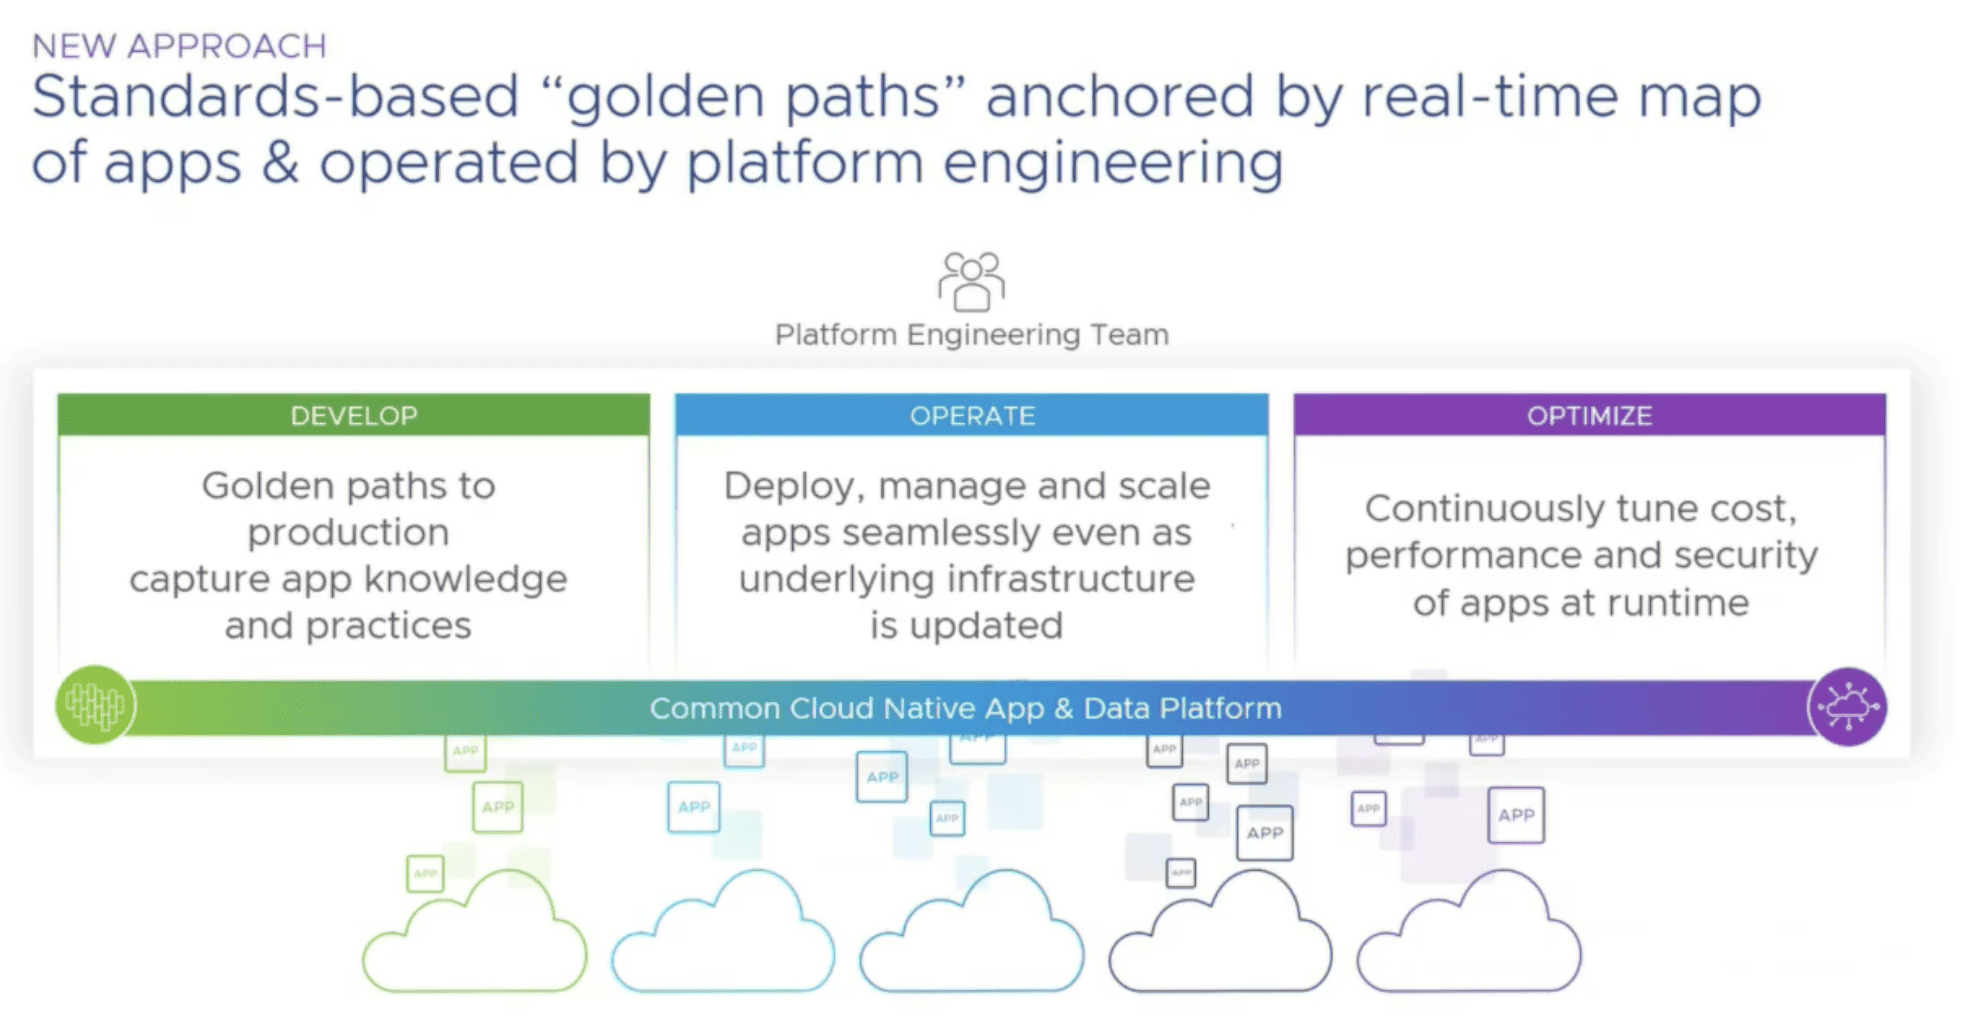 1. Develop – Golden paths to production capture app knowledge and practices 2. Operate – Deploy, manage and scale apps seamlessly even as underlying infrastructure is updated. 3. Optimize – Continuously tune cost, performance and security of apps at runtime.